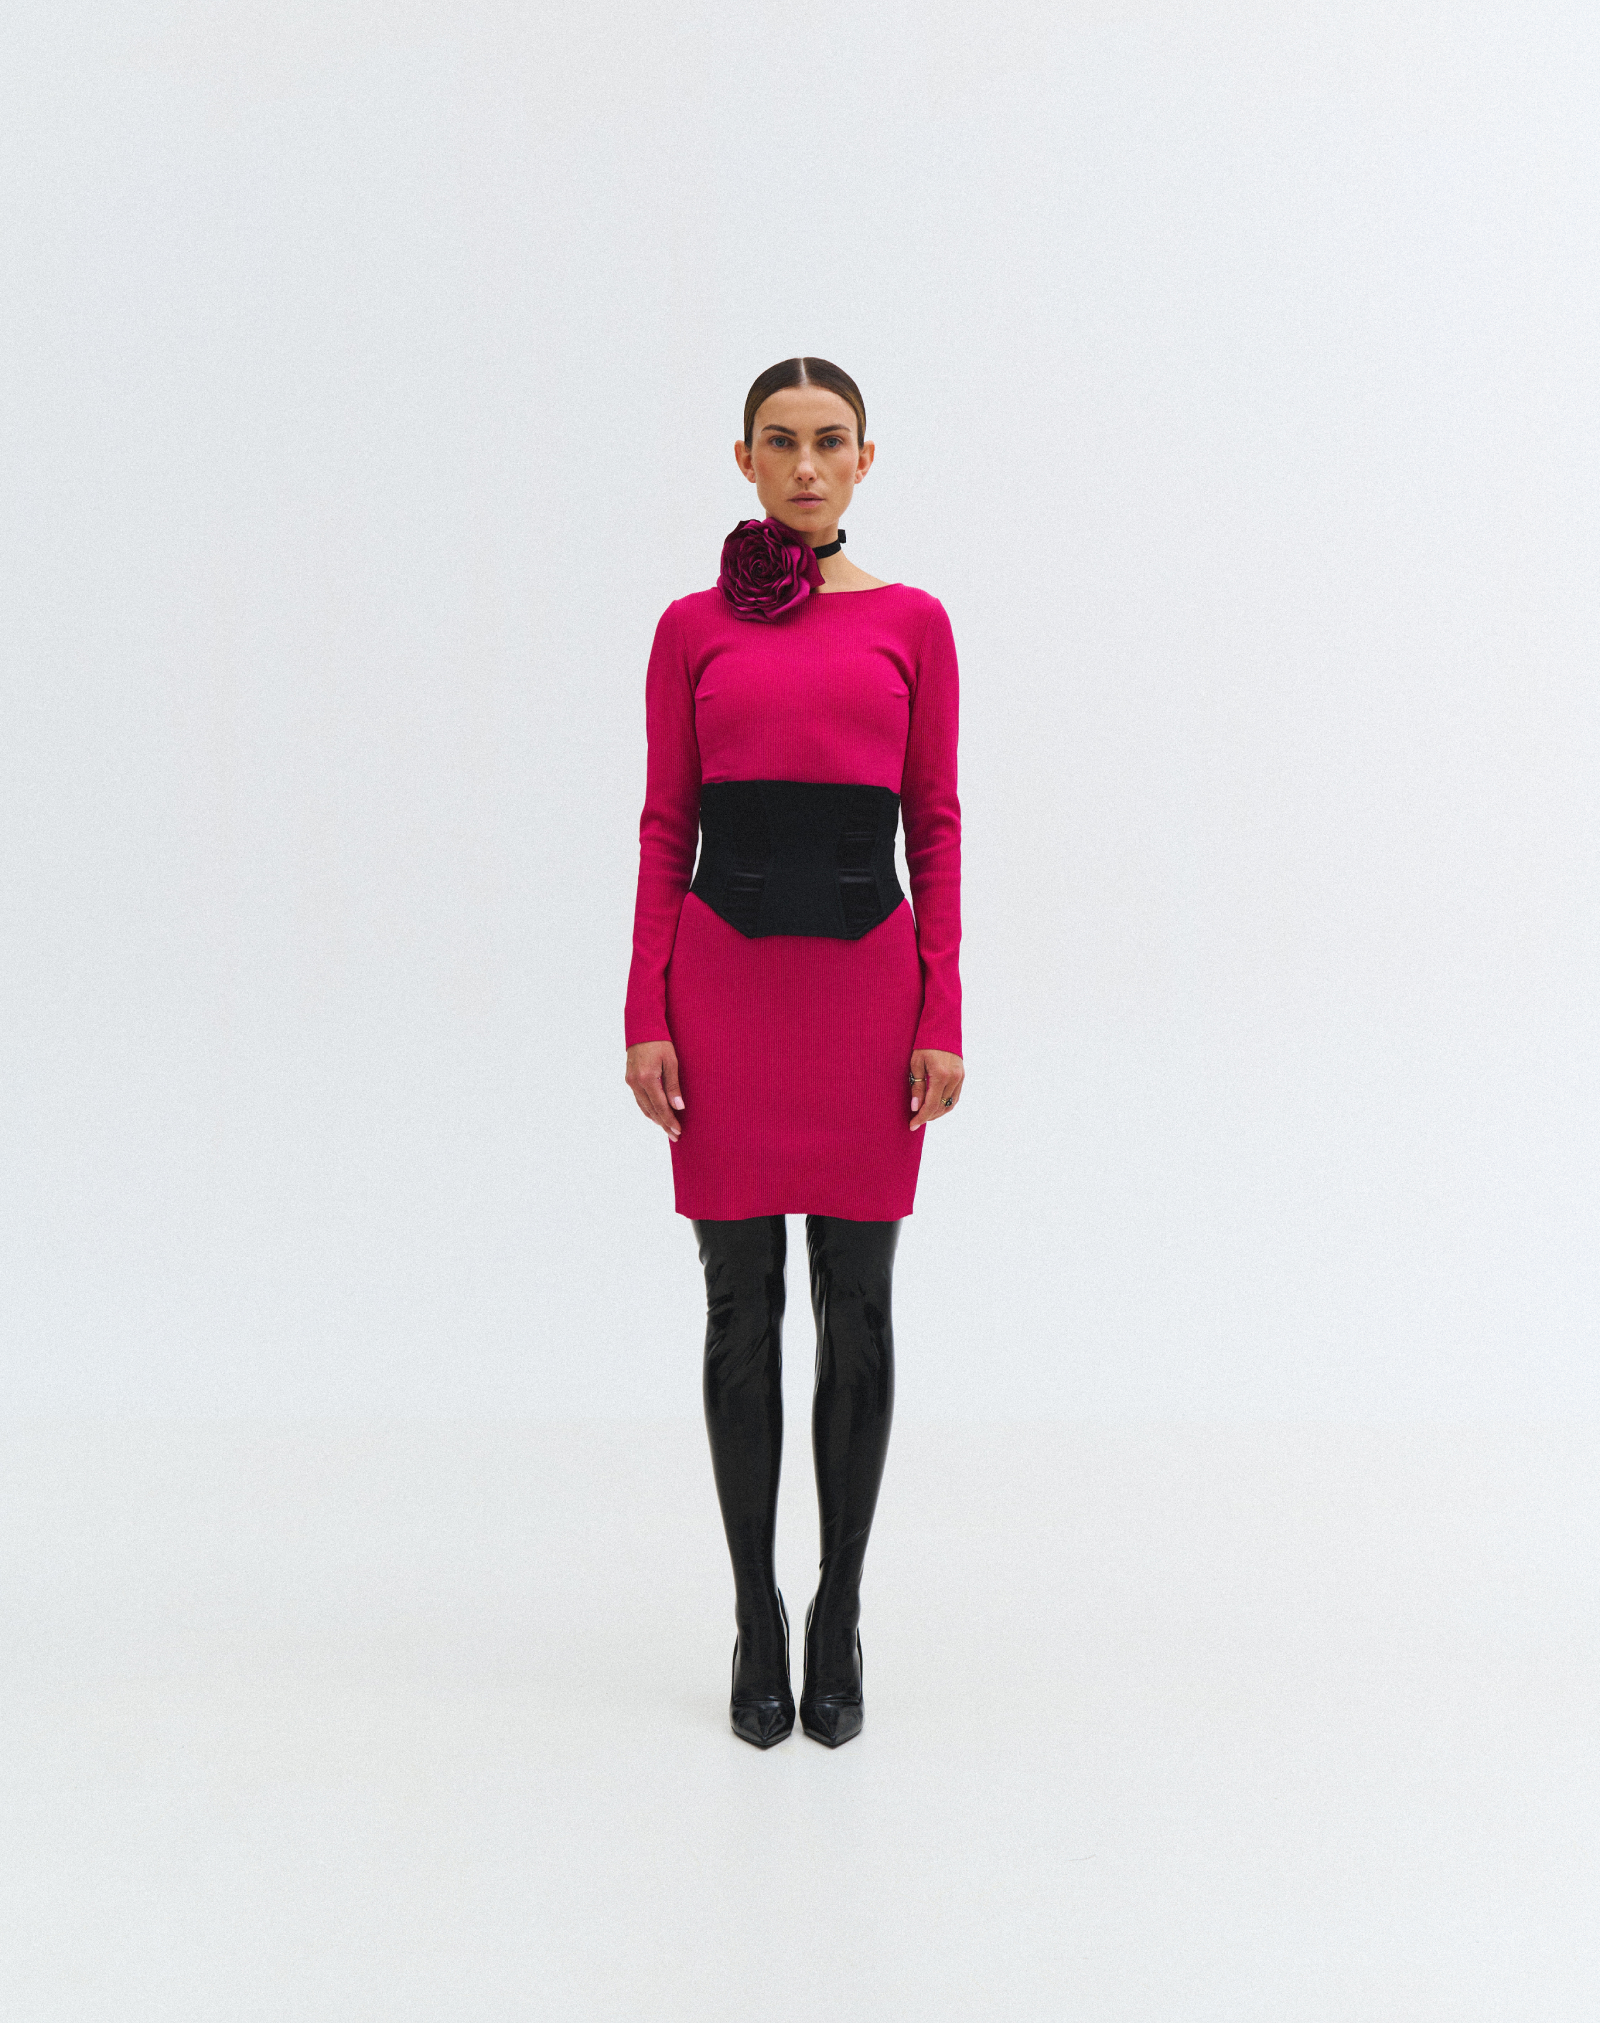 Long-Sleeved Dress in Raspberry Color